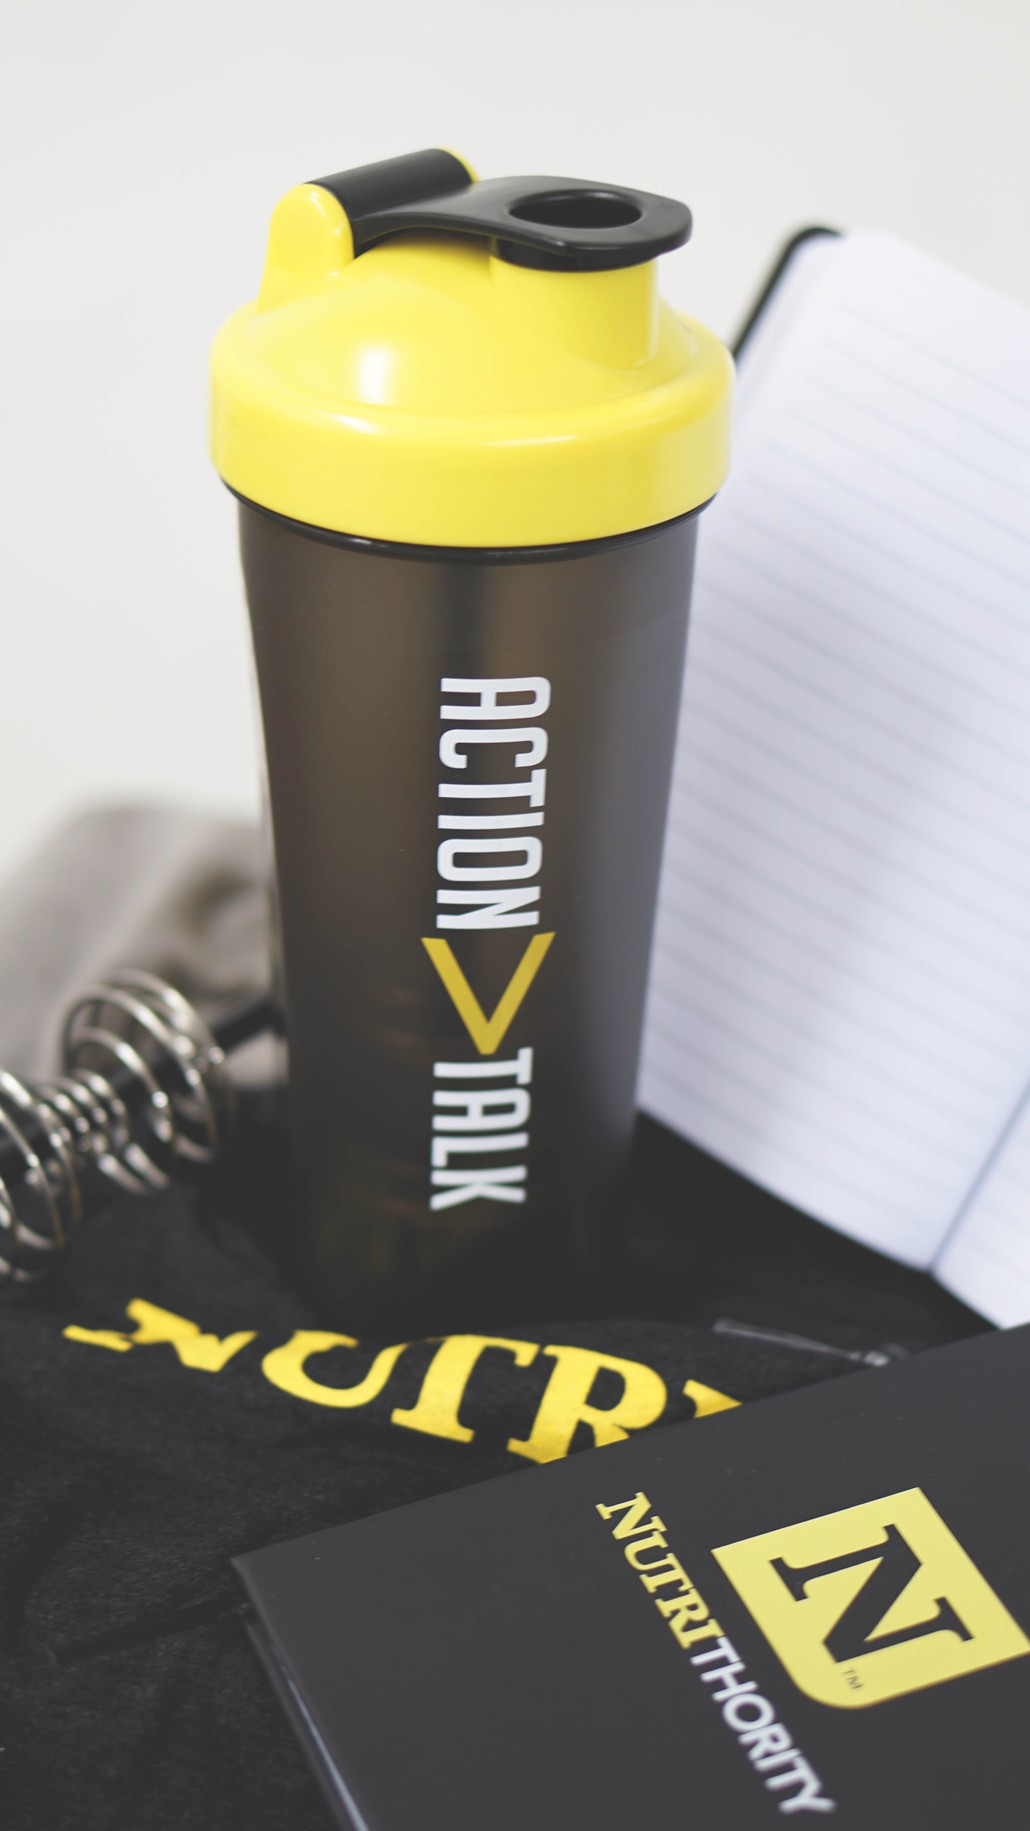 action over talk shaker bottle and notebook